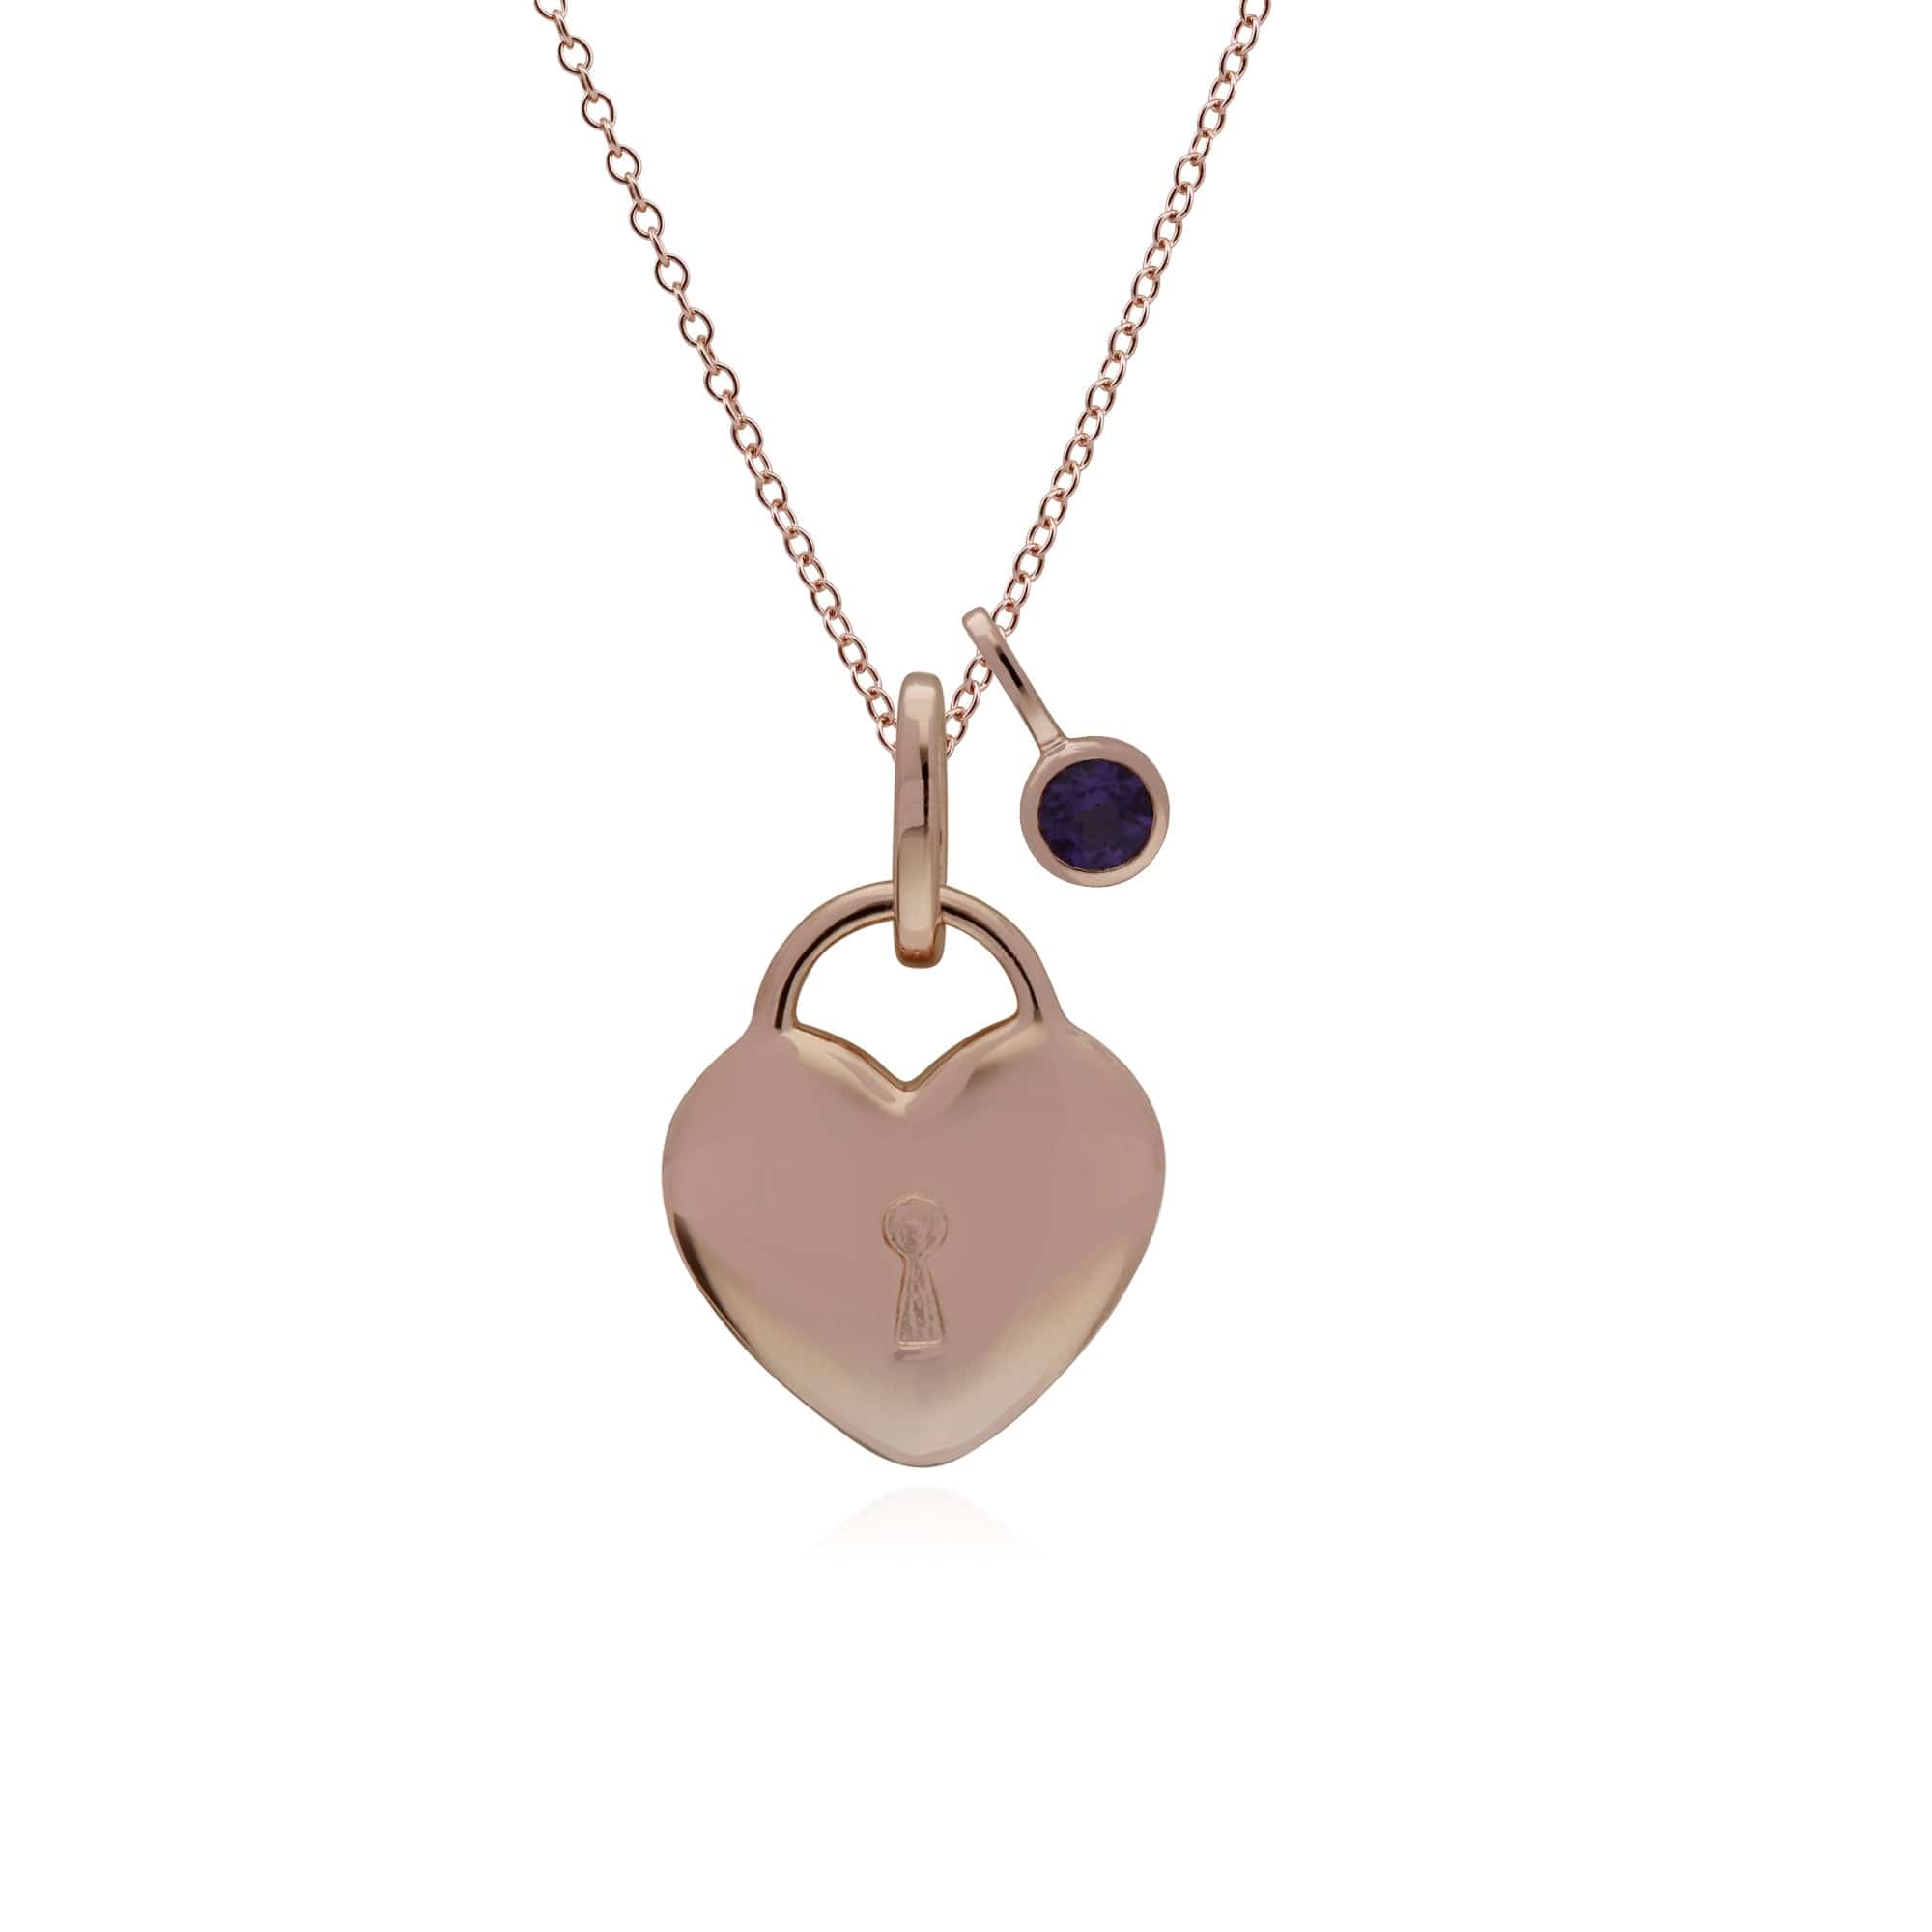 270P027301925-270P026901925 Classic Heart Lock Pendant & Amethyst Charm in Rose Gold Plated 925 Sterling Silver 1